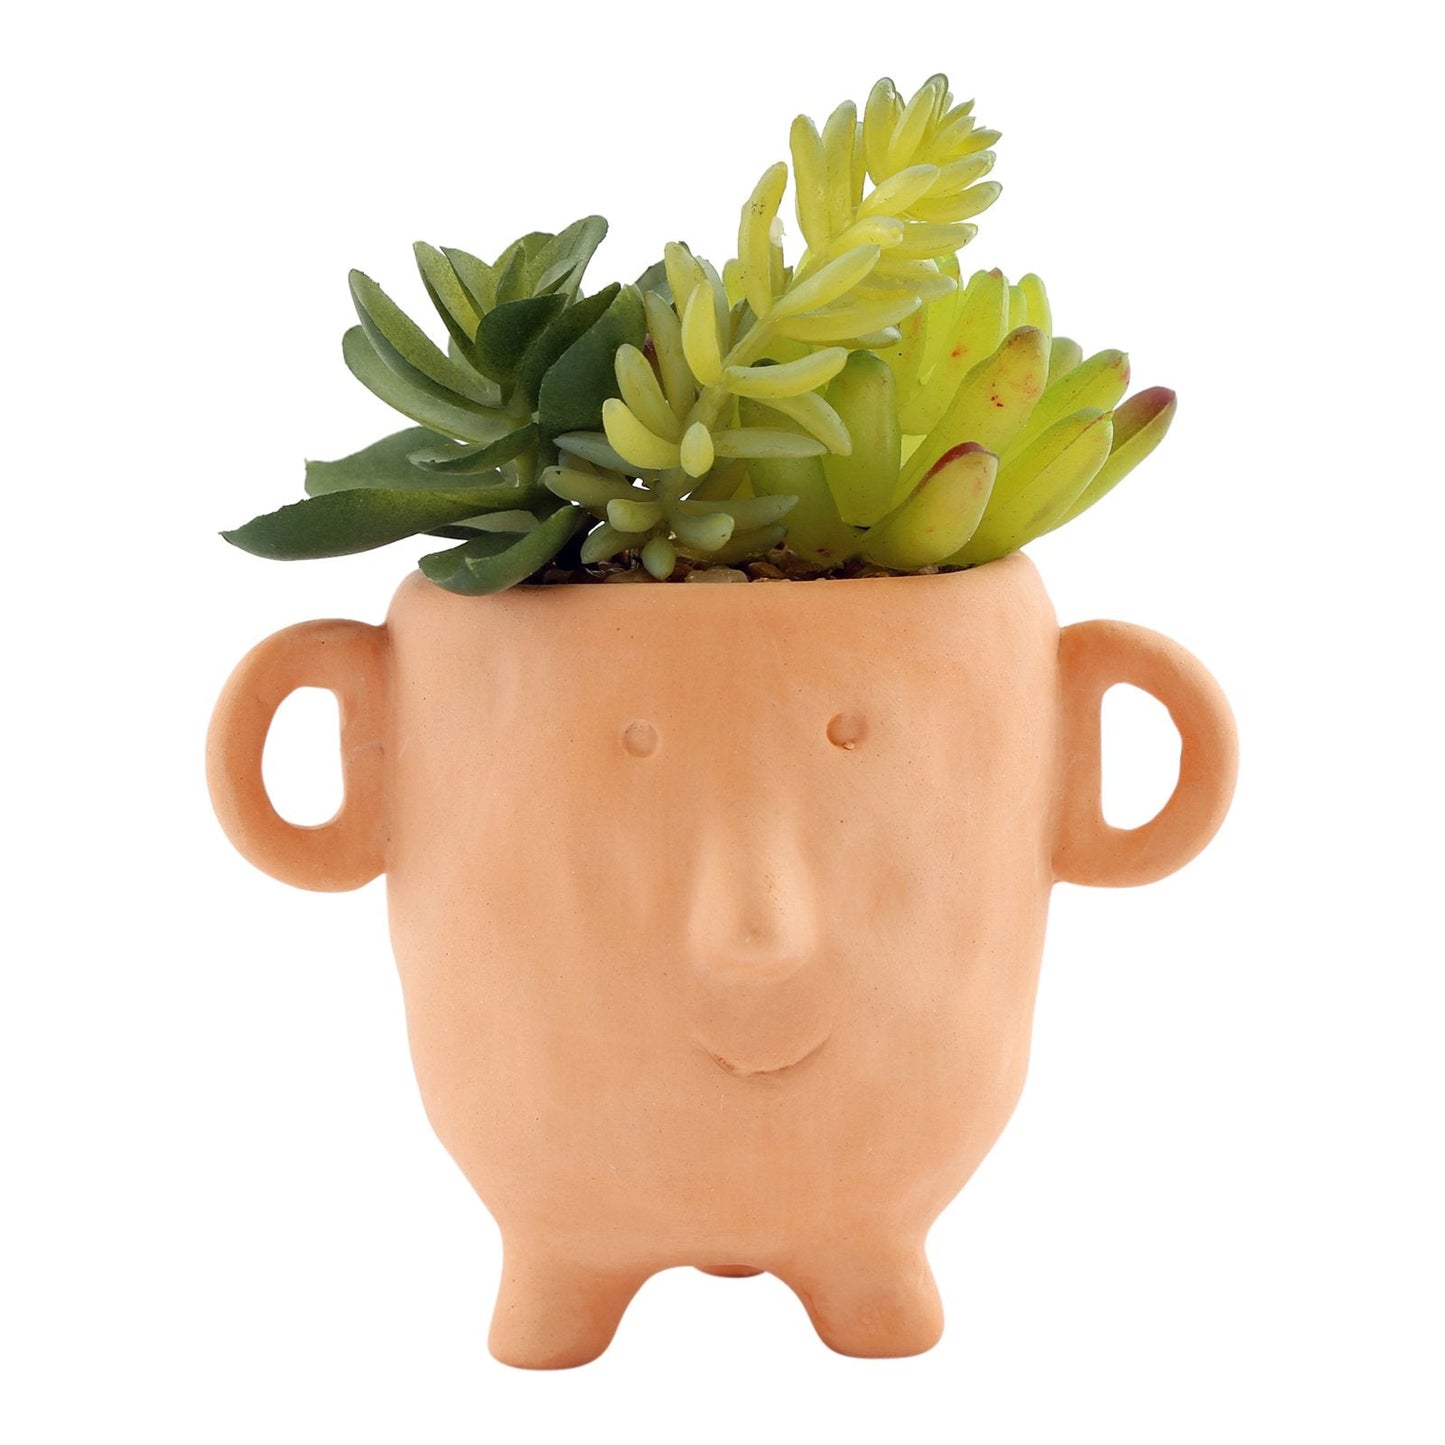 FACE TERRACOTTA POT WITH FAUX CACTI SMALL ARTIFICIAL PLANTS & FLOWERS from Eleanoras